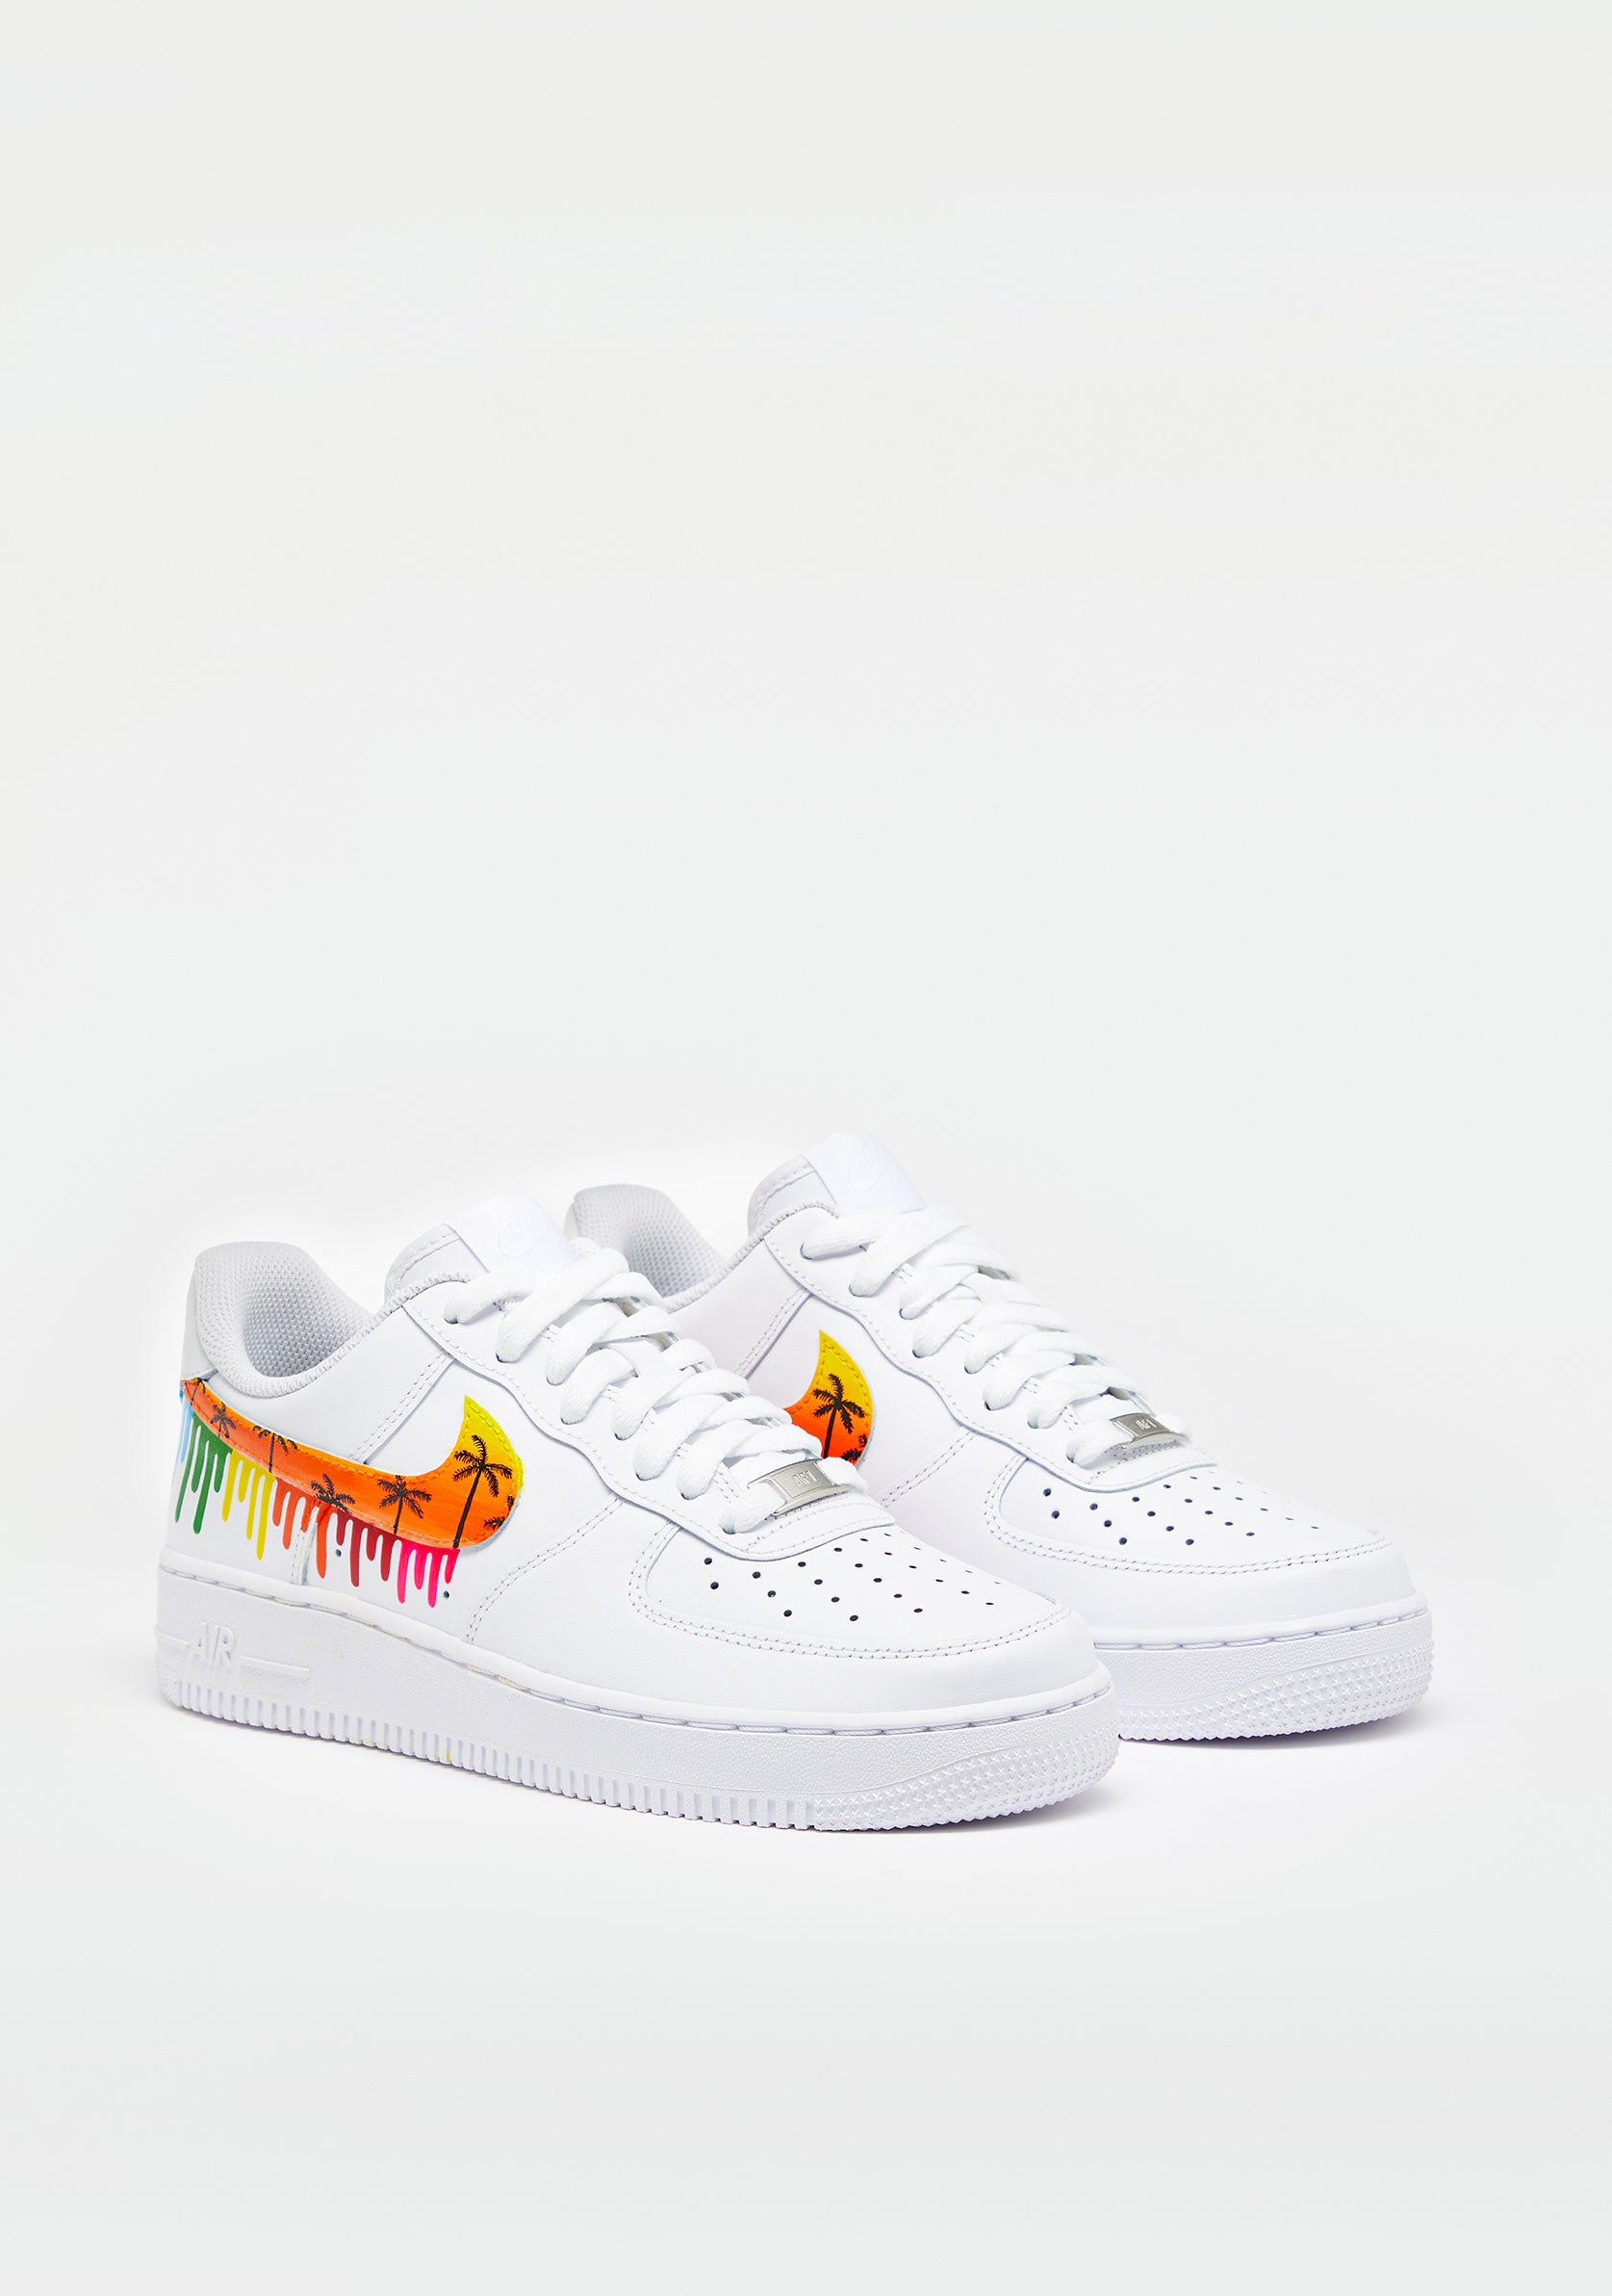 Nike Air Force 1 Color Drip Hand Drawn Paint Marker Custom Sneakers Colorful  Customized Shoes Nike Rainbow Custom 